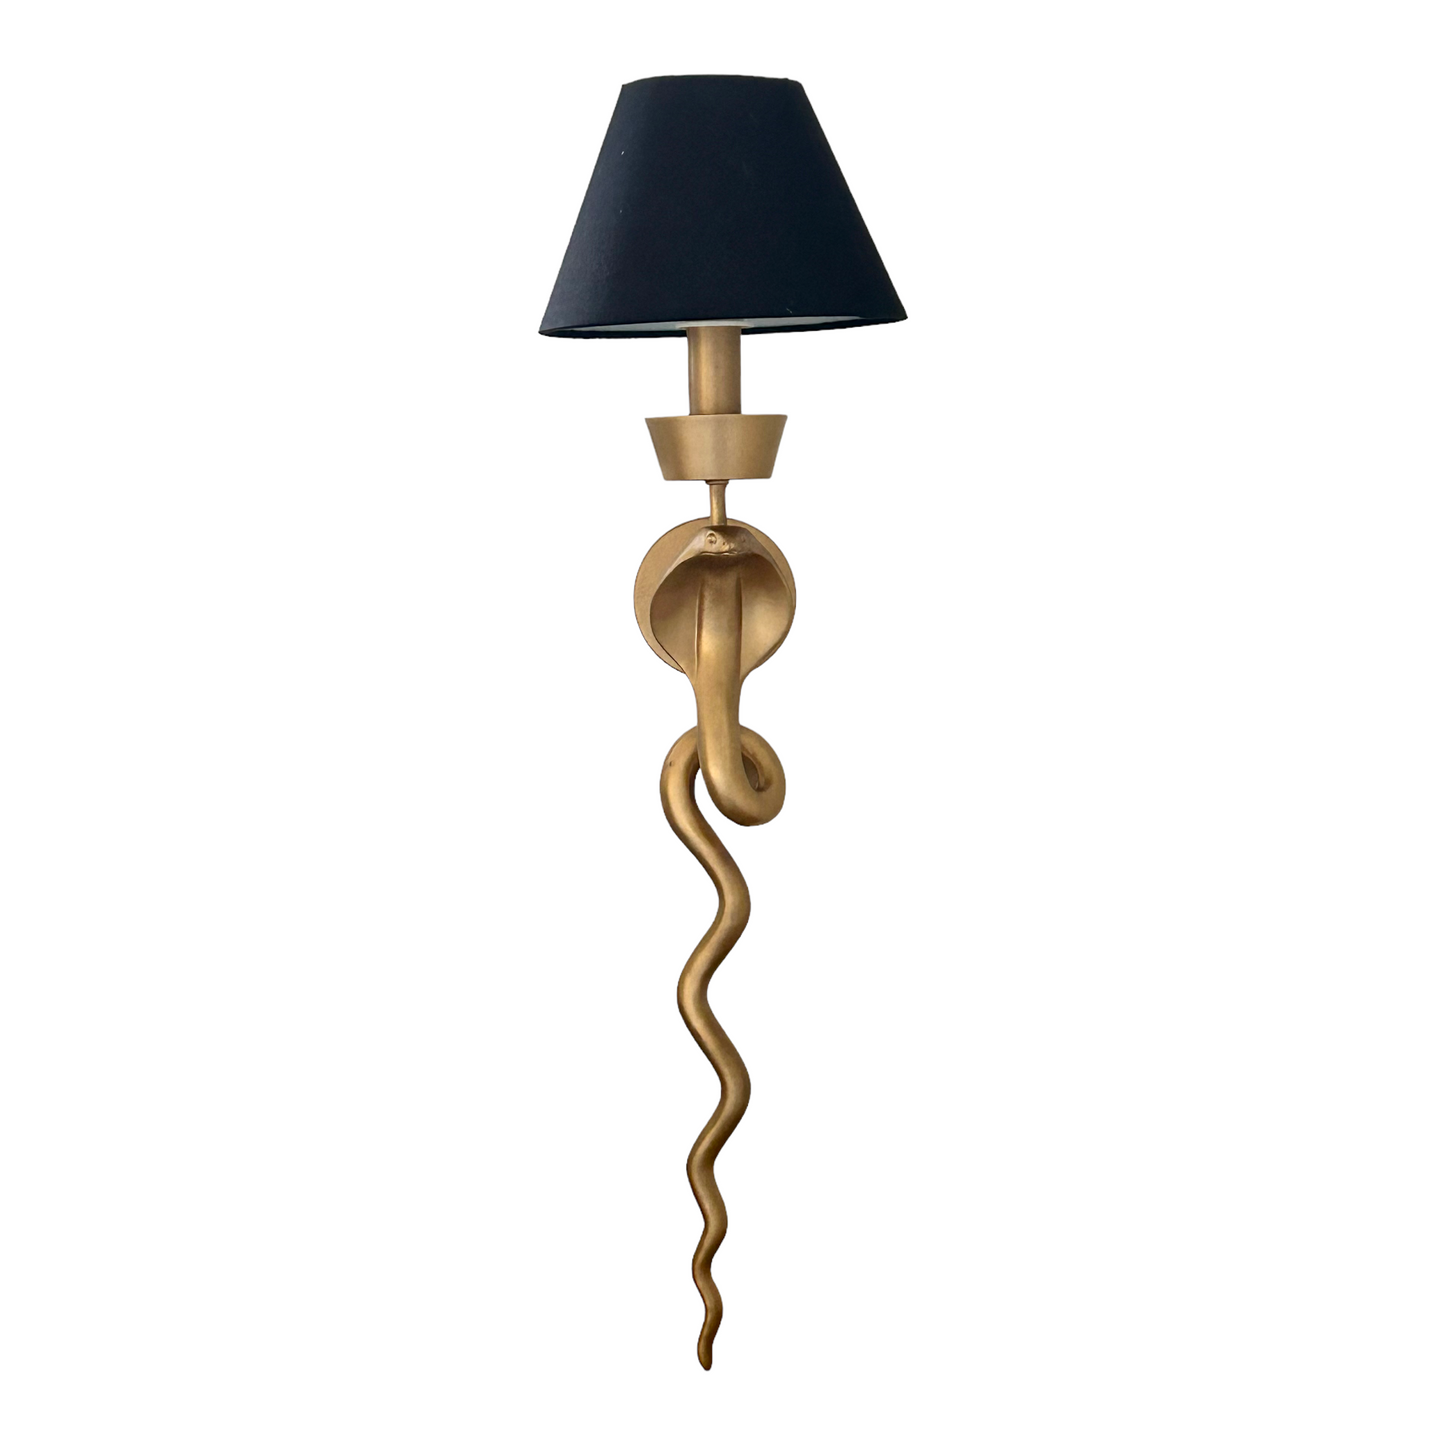 Antique Gold Snake Wall Sconce Black - Curated Home Decor